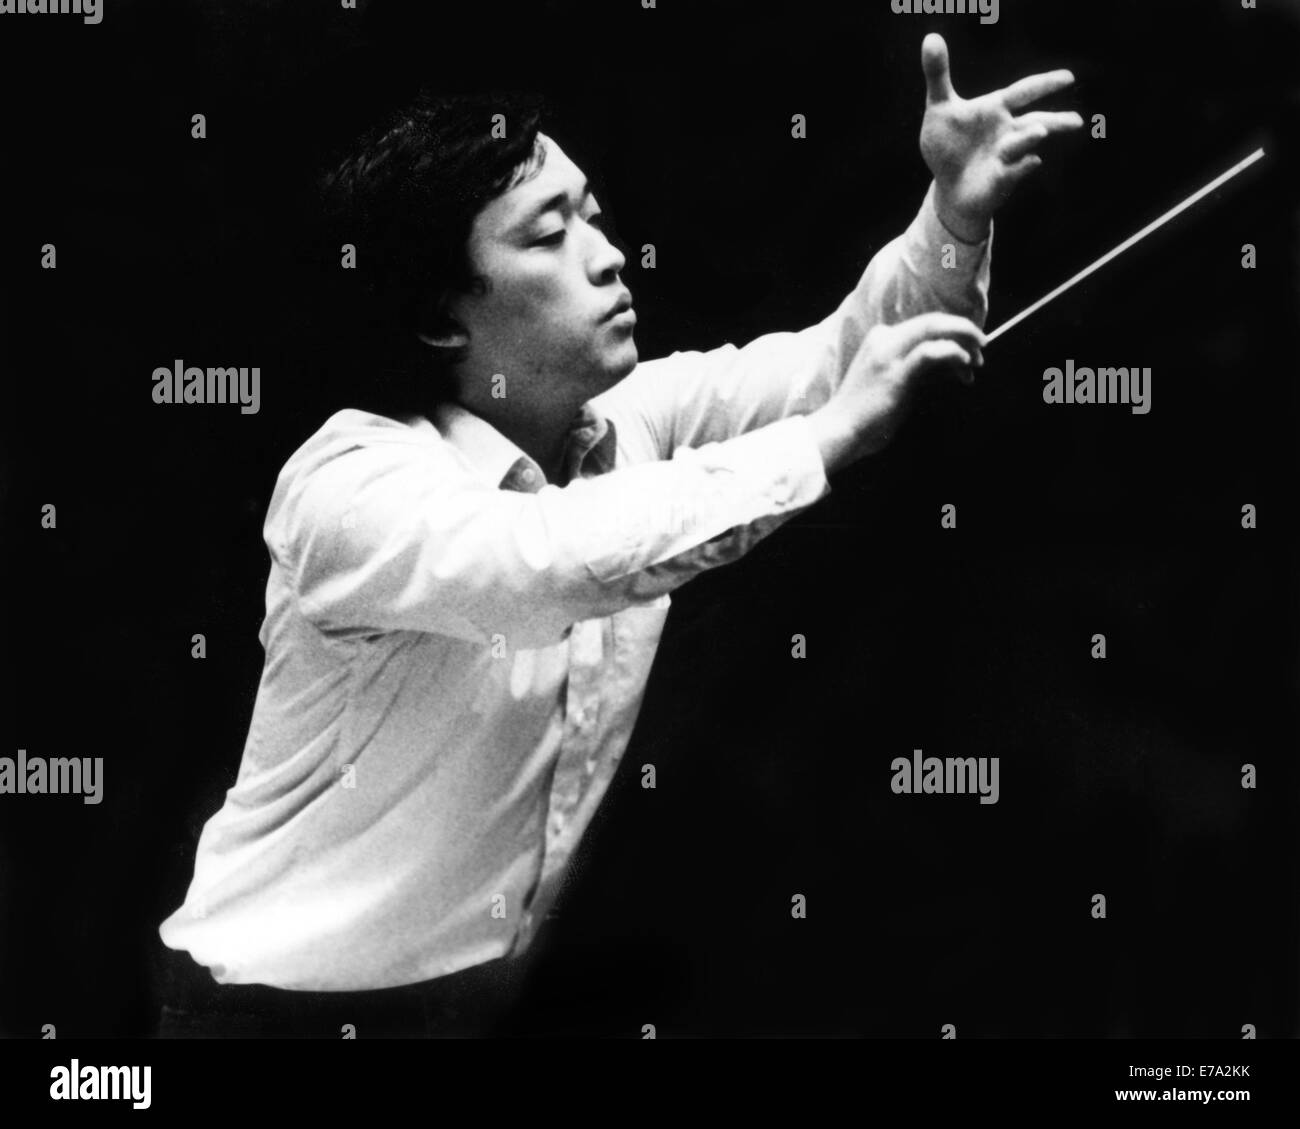 Myung-whun Chung, South Korean Pianist and Conductor, Portrait, circa 1980's Stock Photo